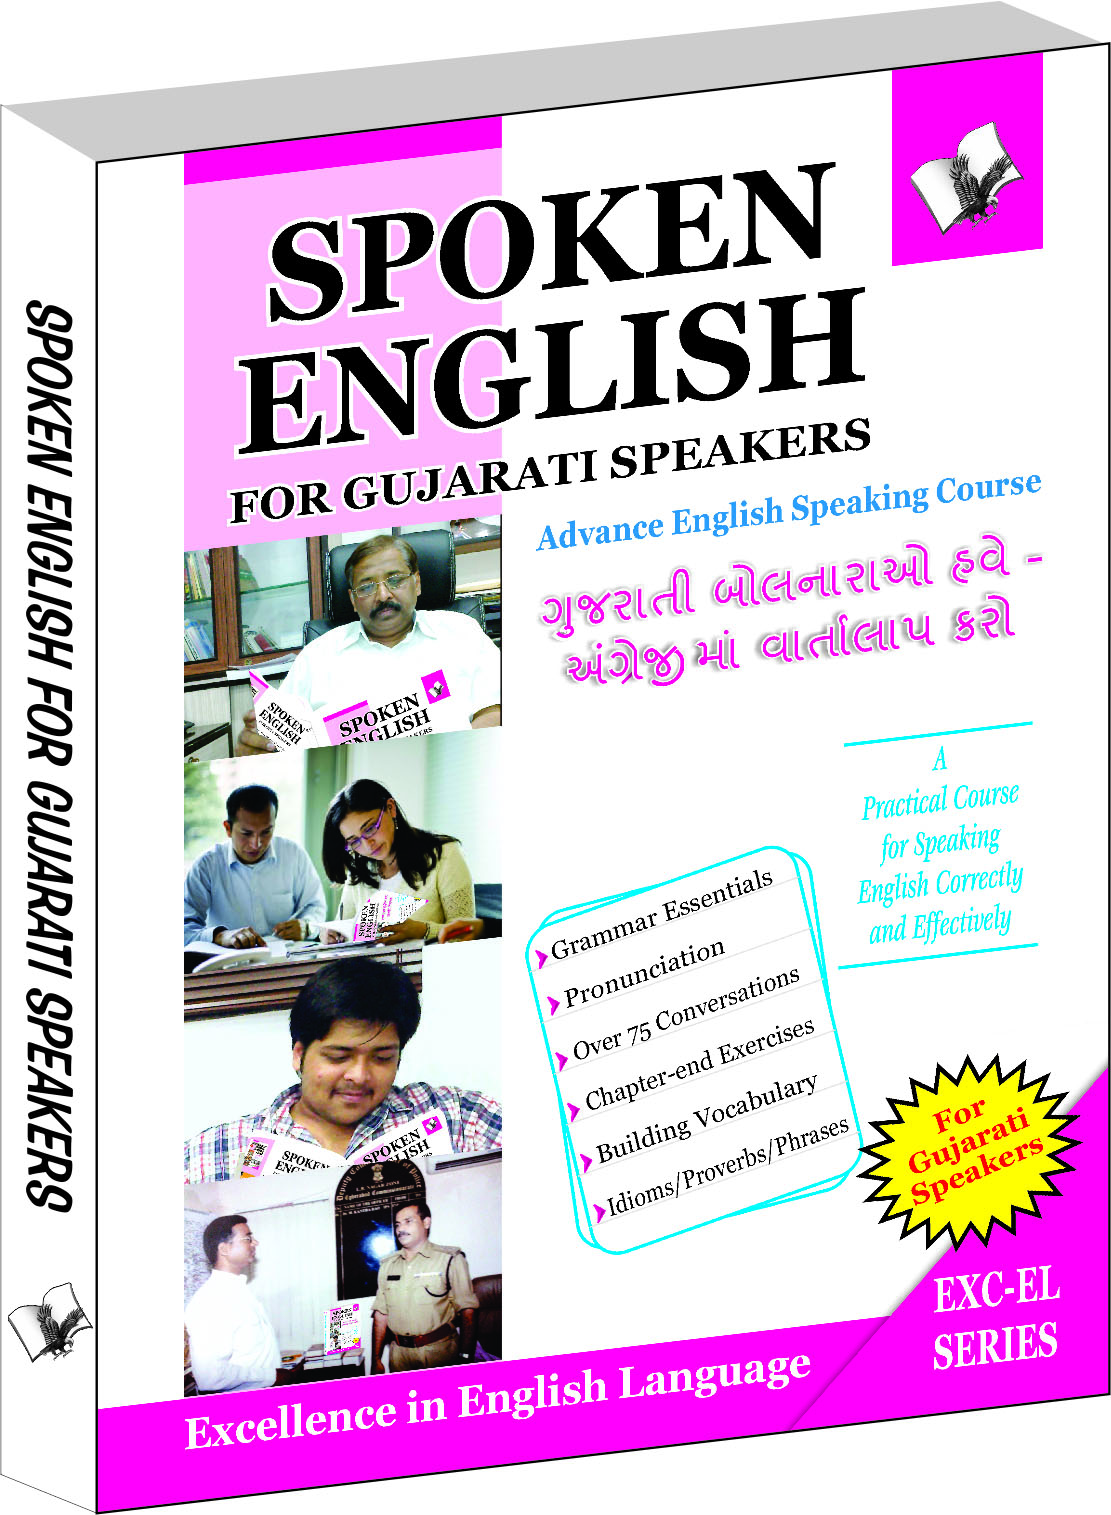 Spoken English For Gujarati Speakers-How to convey your ideas in English at home, market & business for Gujarati speakers